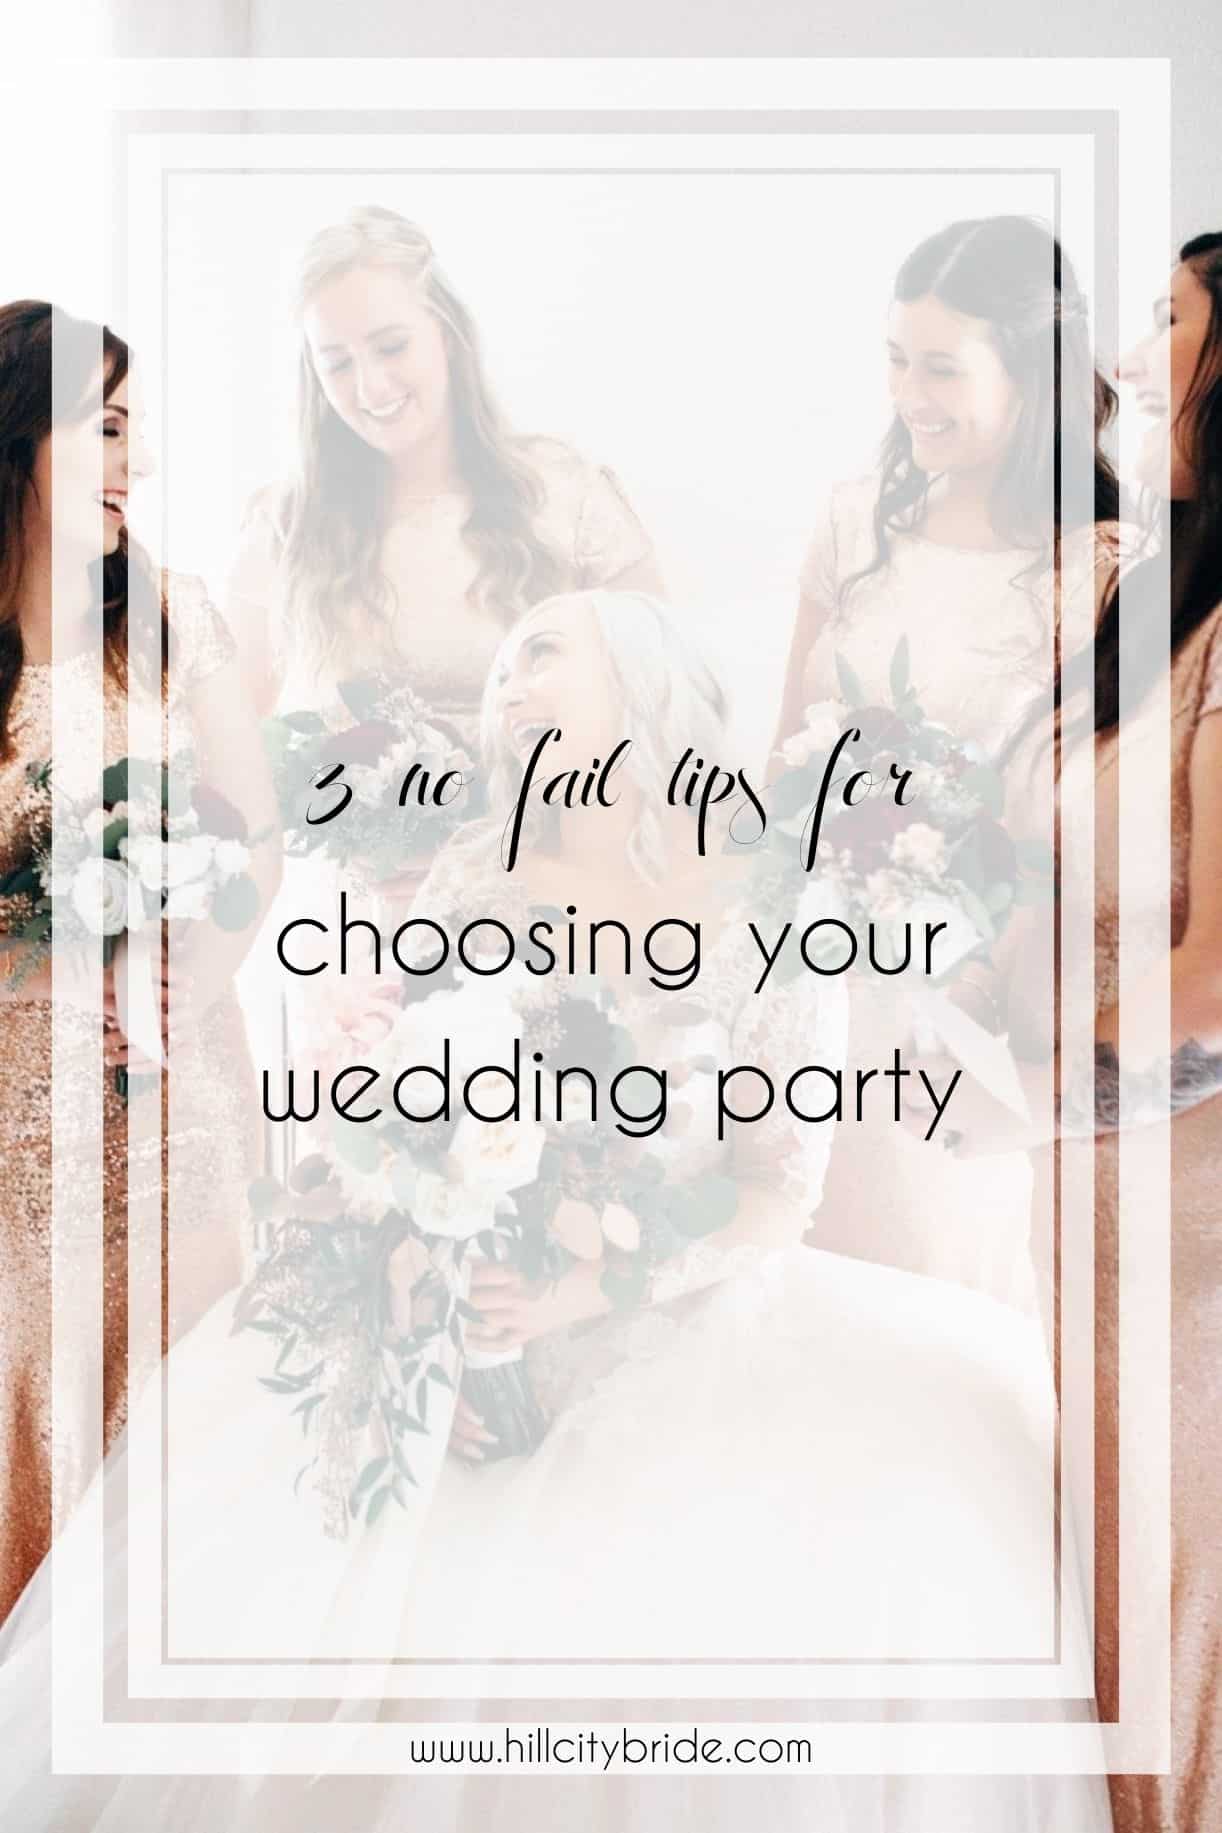 3 No Fail Tips for Choosing Your Wedding Party